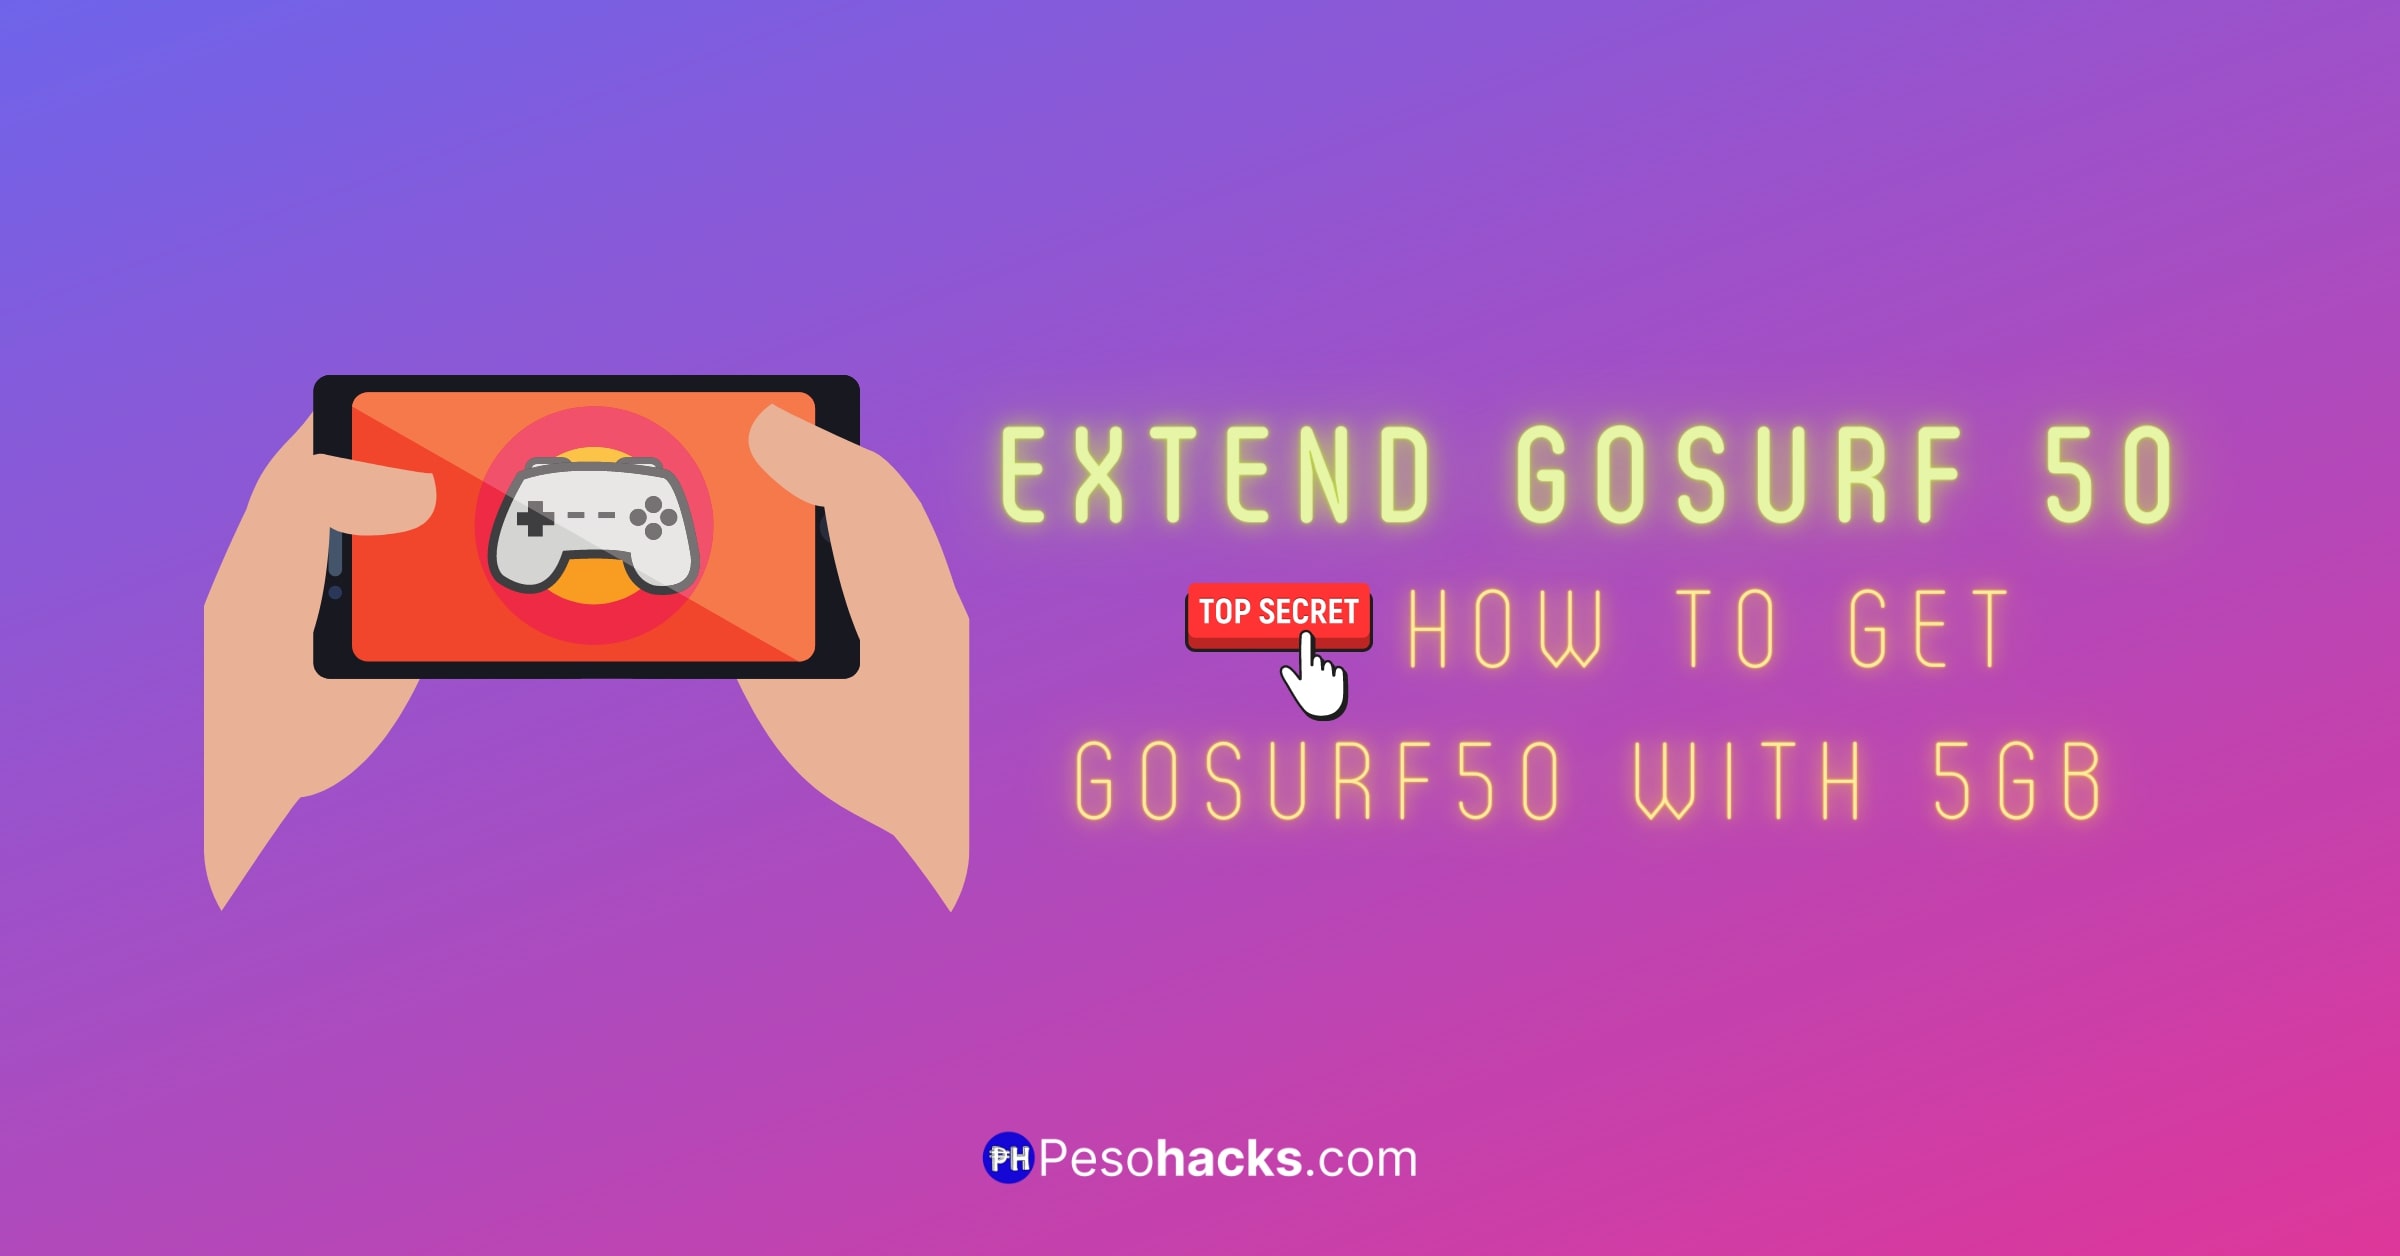 How to extend gosurf50